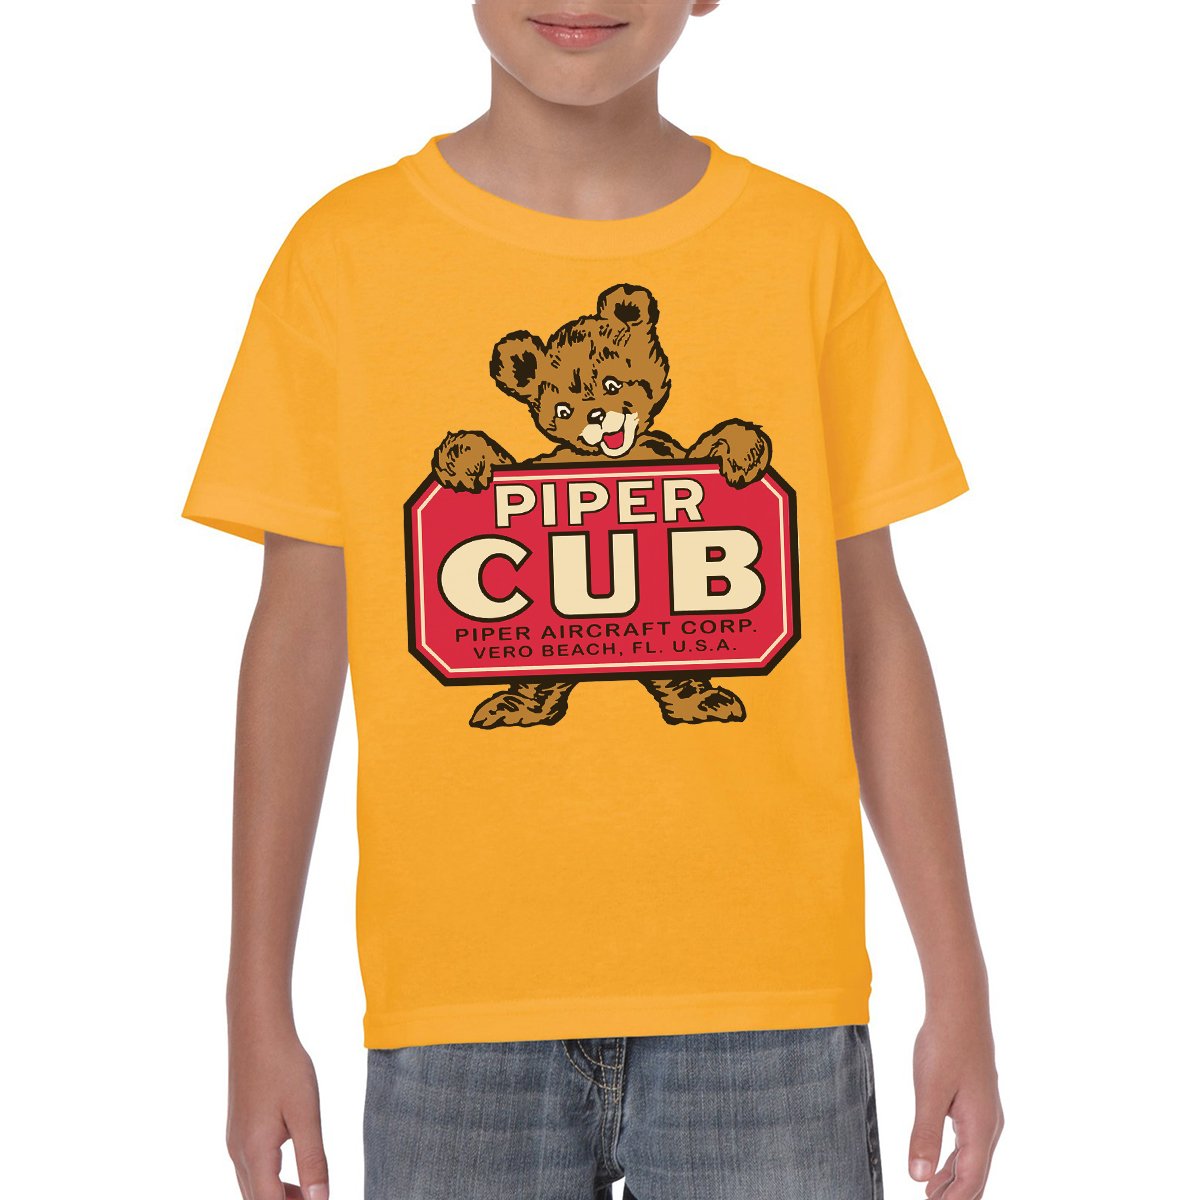 PIPER CUB Youth Semi-Fitted T-Shirt